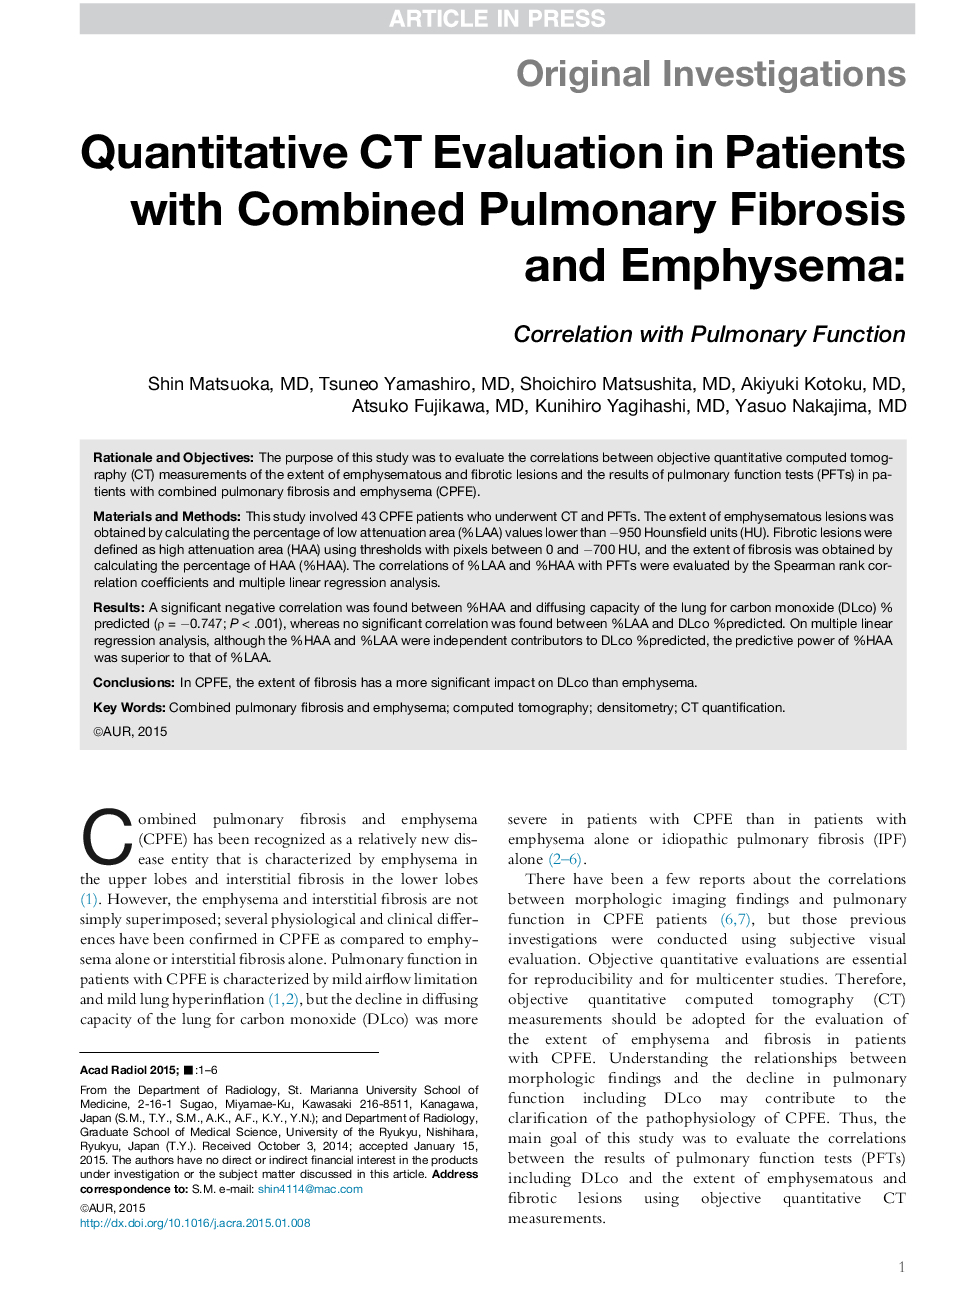 Quantitative CT Evaluation in Patients with Combined Pulmonary Fibrosis and Emphysema